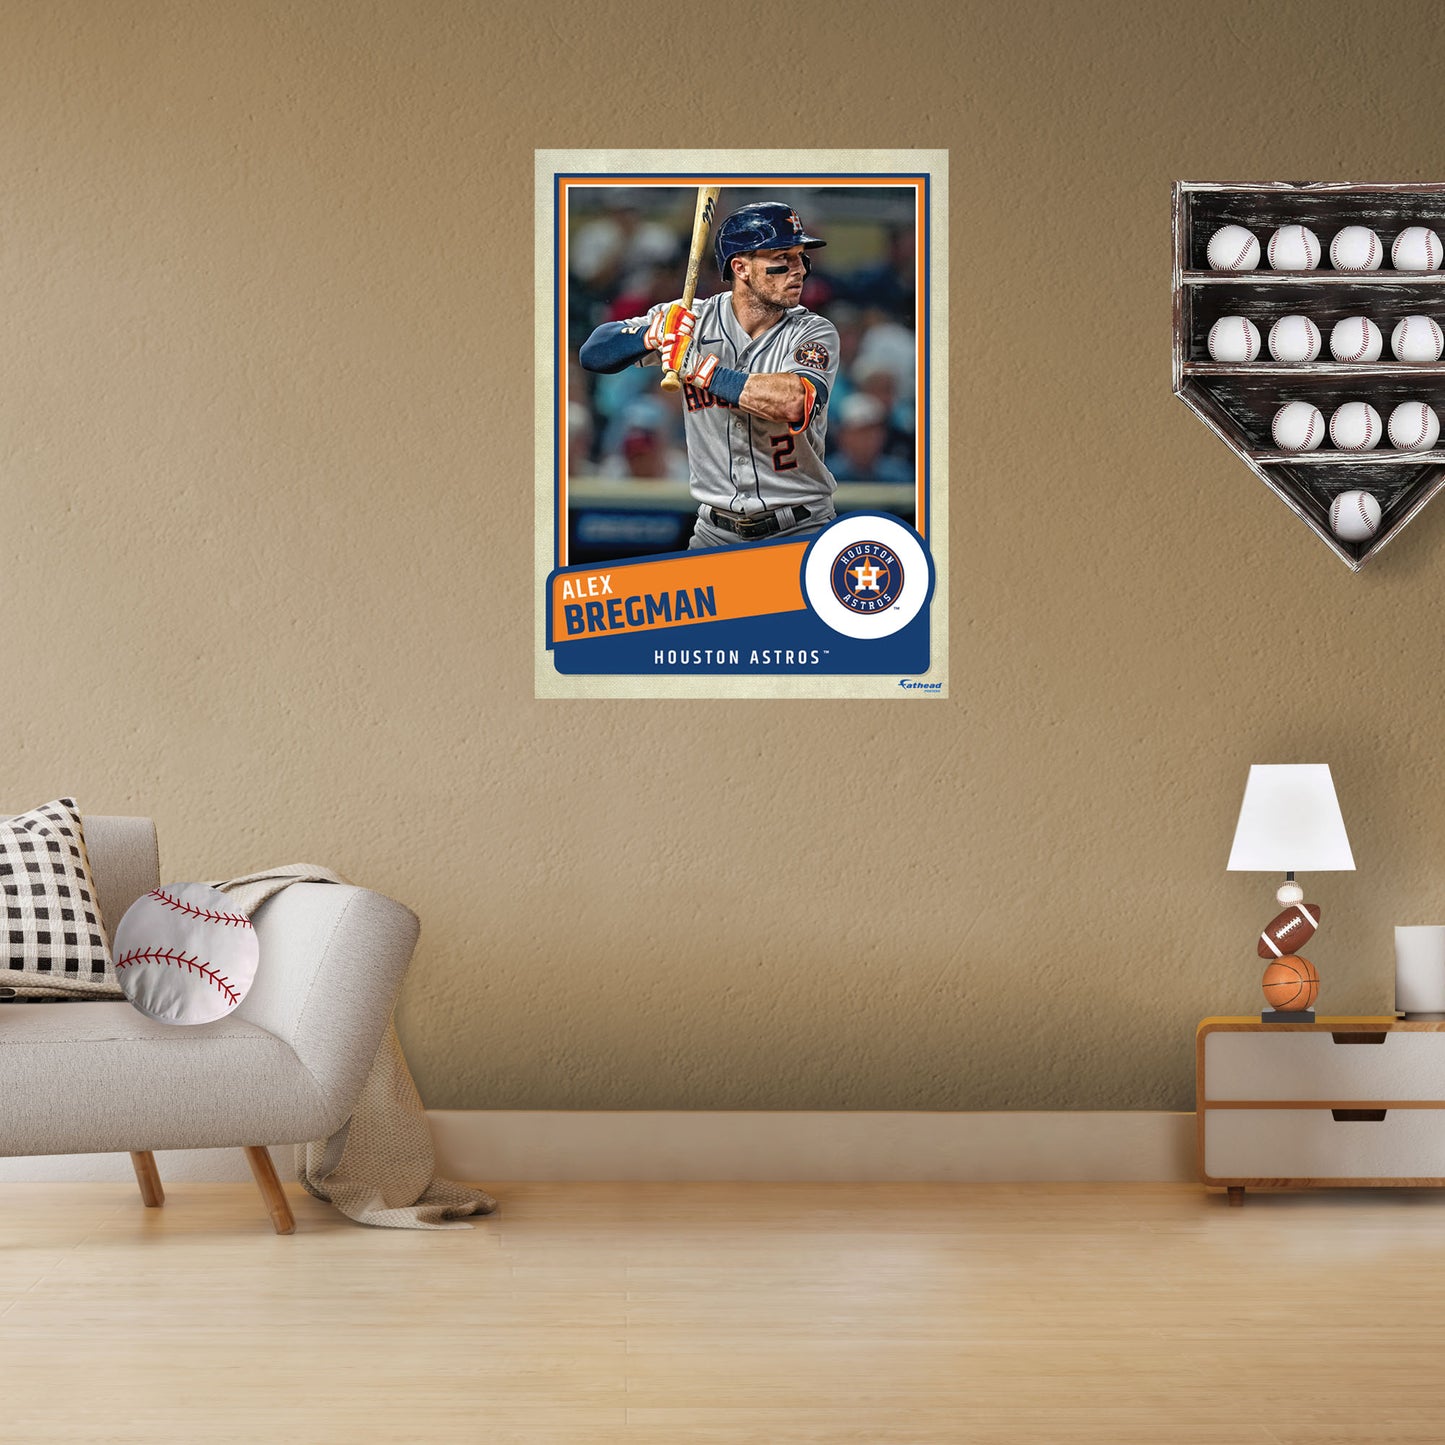 Houston Astros: Alex Bregman  Poster        - Officially Licensed MLB Removable     Adhesive Decal